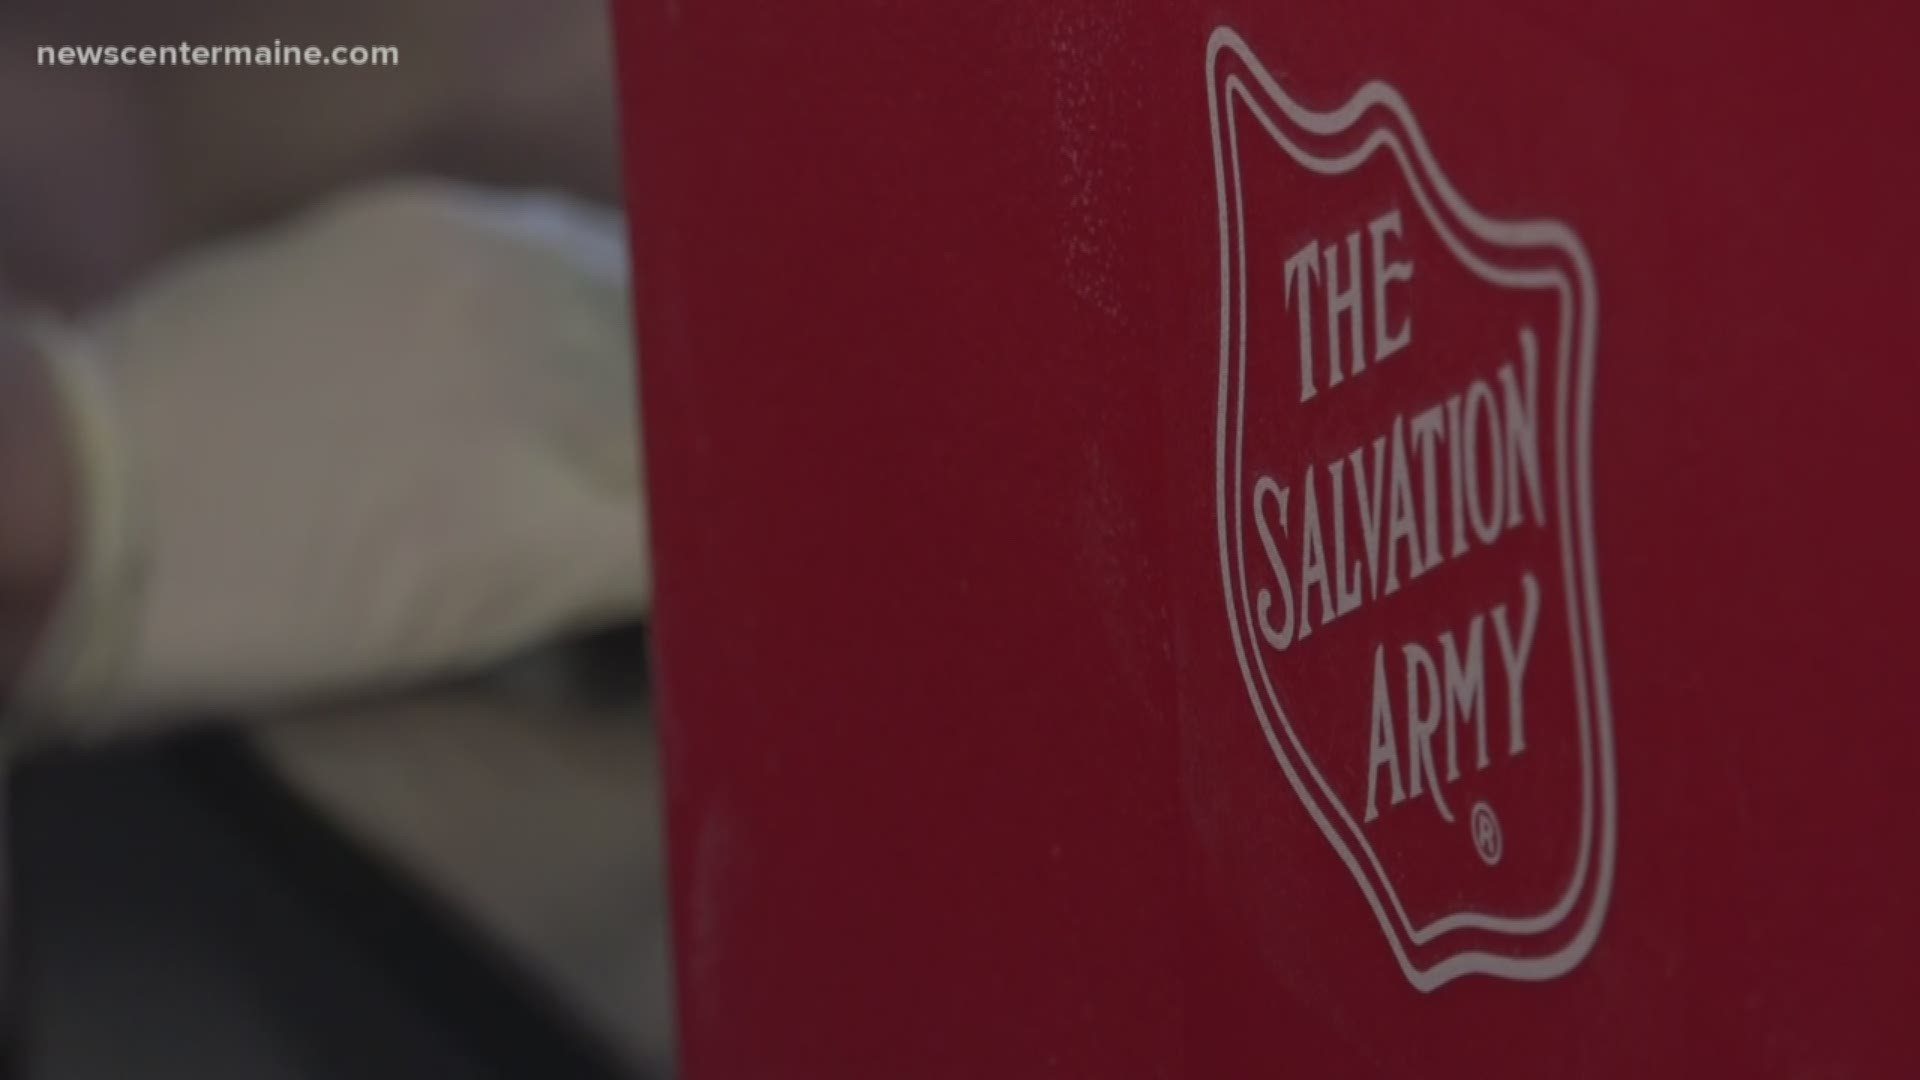 The Bangor Salvation Army is still working hard to feed people in need -- but it has recently had to close its thrift stores as a precaution against COVID-19.